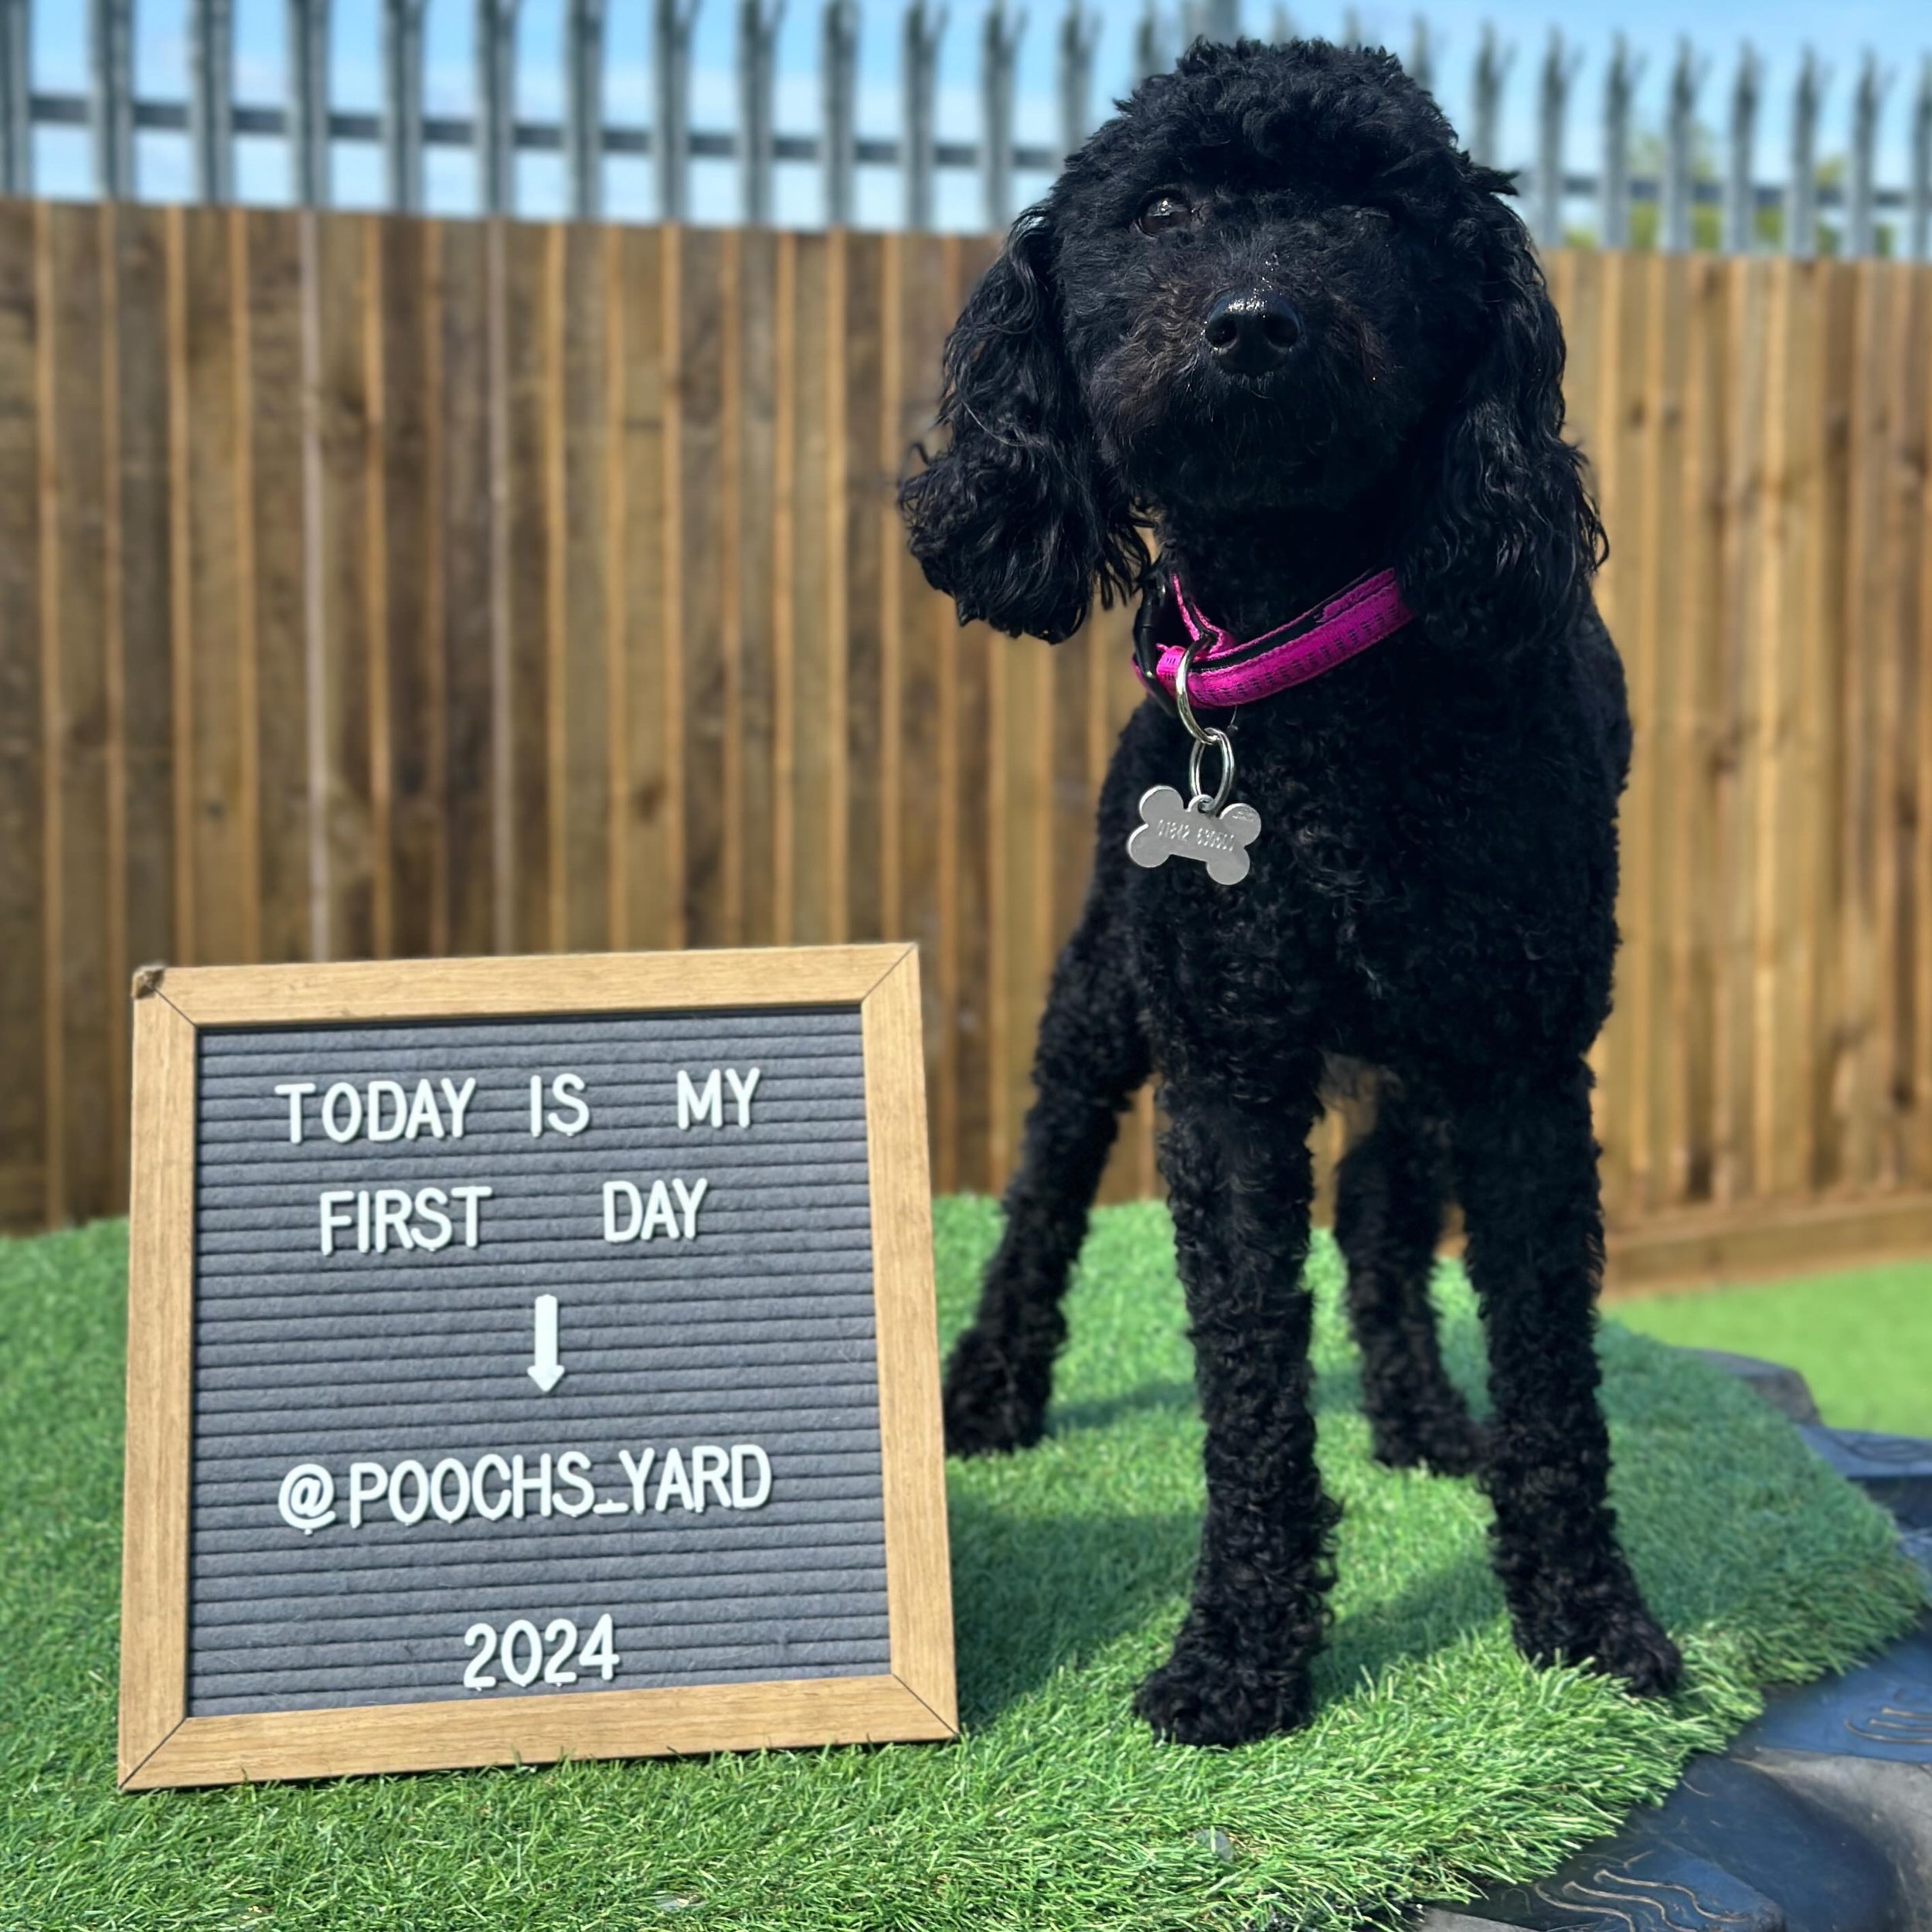 We&rsquo;ve got a duo treat for you today! 
&mdash;
Everyone we&rsquo;d love to introduce you all to Elsie! A loving, playful and sweet little Cockapoo! Elsie came to use our amazing groomer last week and decided that day care life look so much fun! 